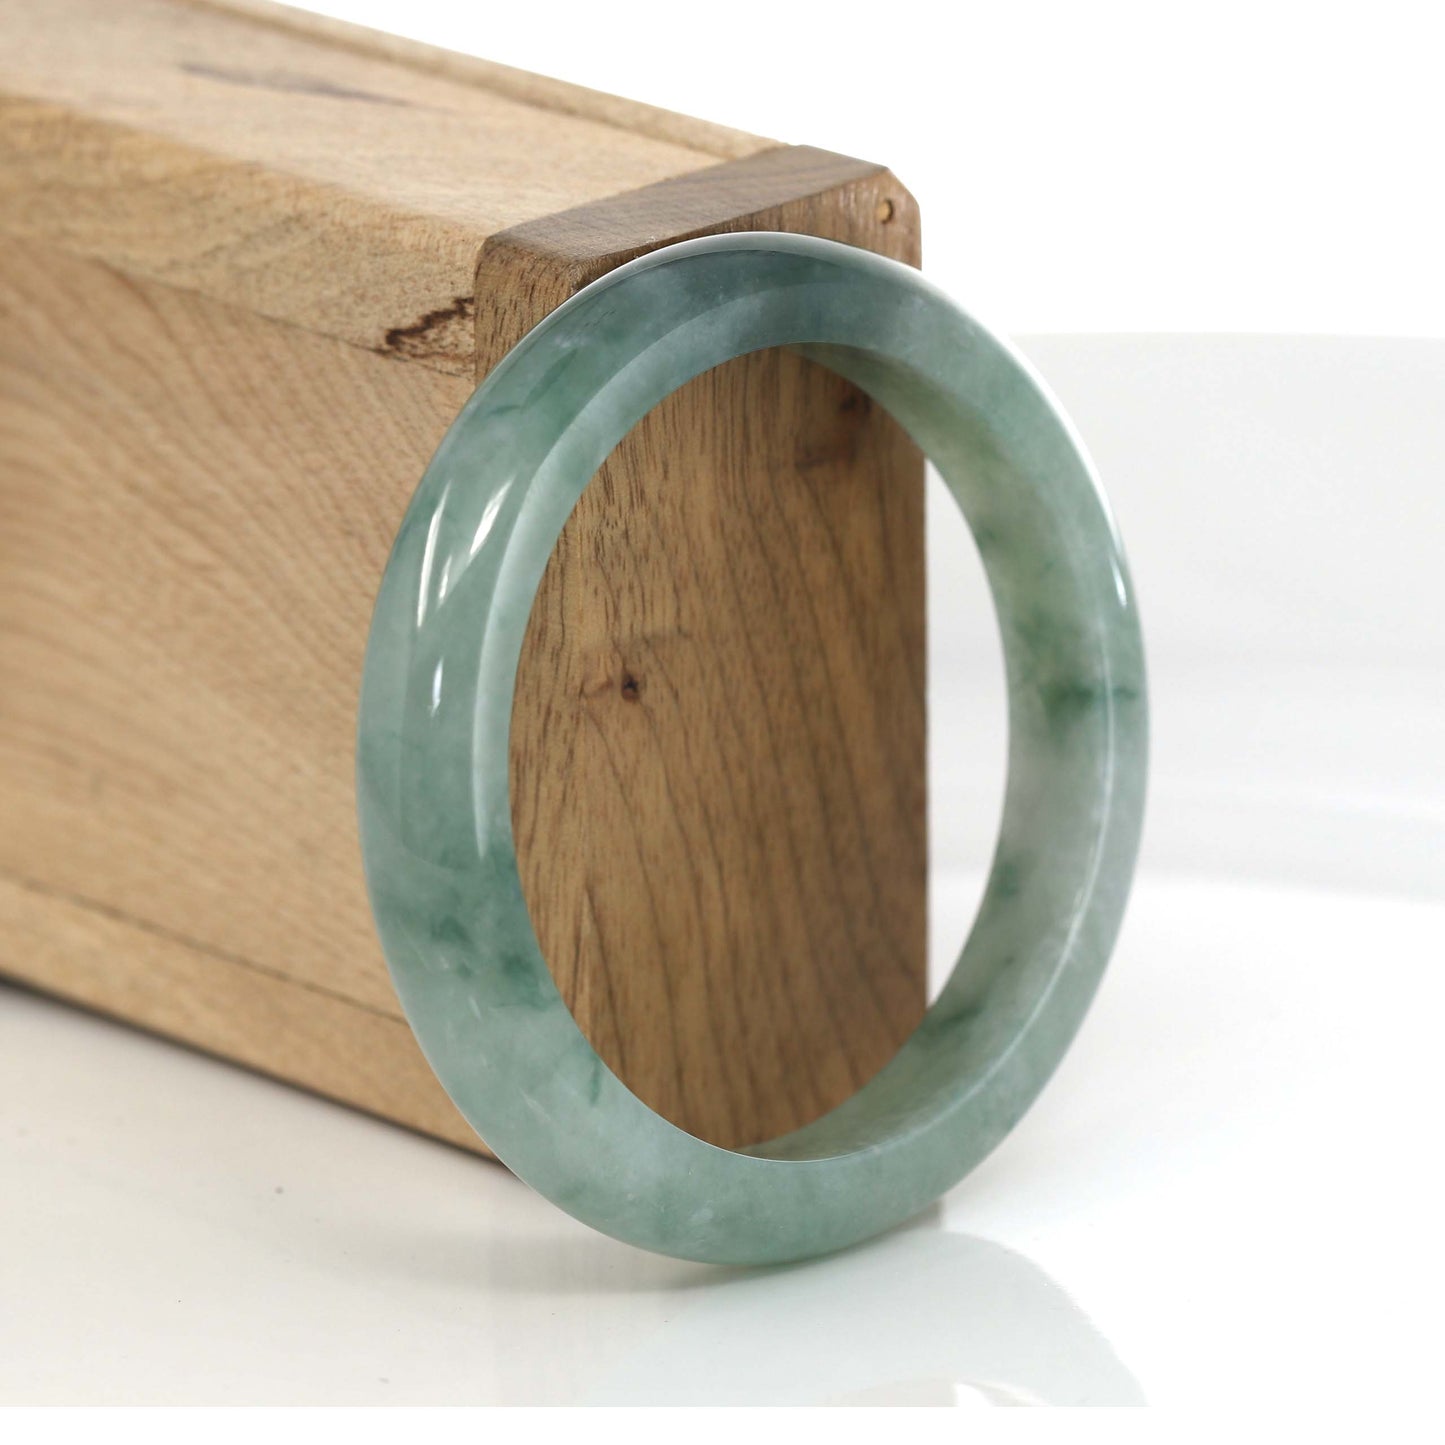 Load image into Gallery viewer, RealJade® Co. Jadeite Jade Bangle Bracelet Classic Real Forest Green Jadeite Jade Bangle Bracelet (54.28 mm) #556
